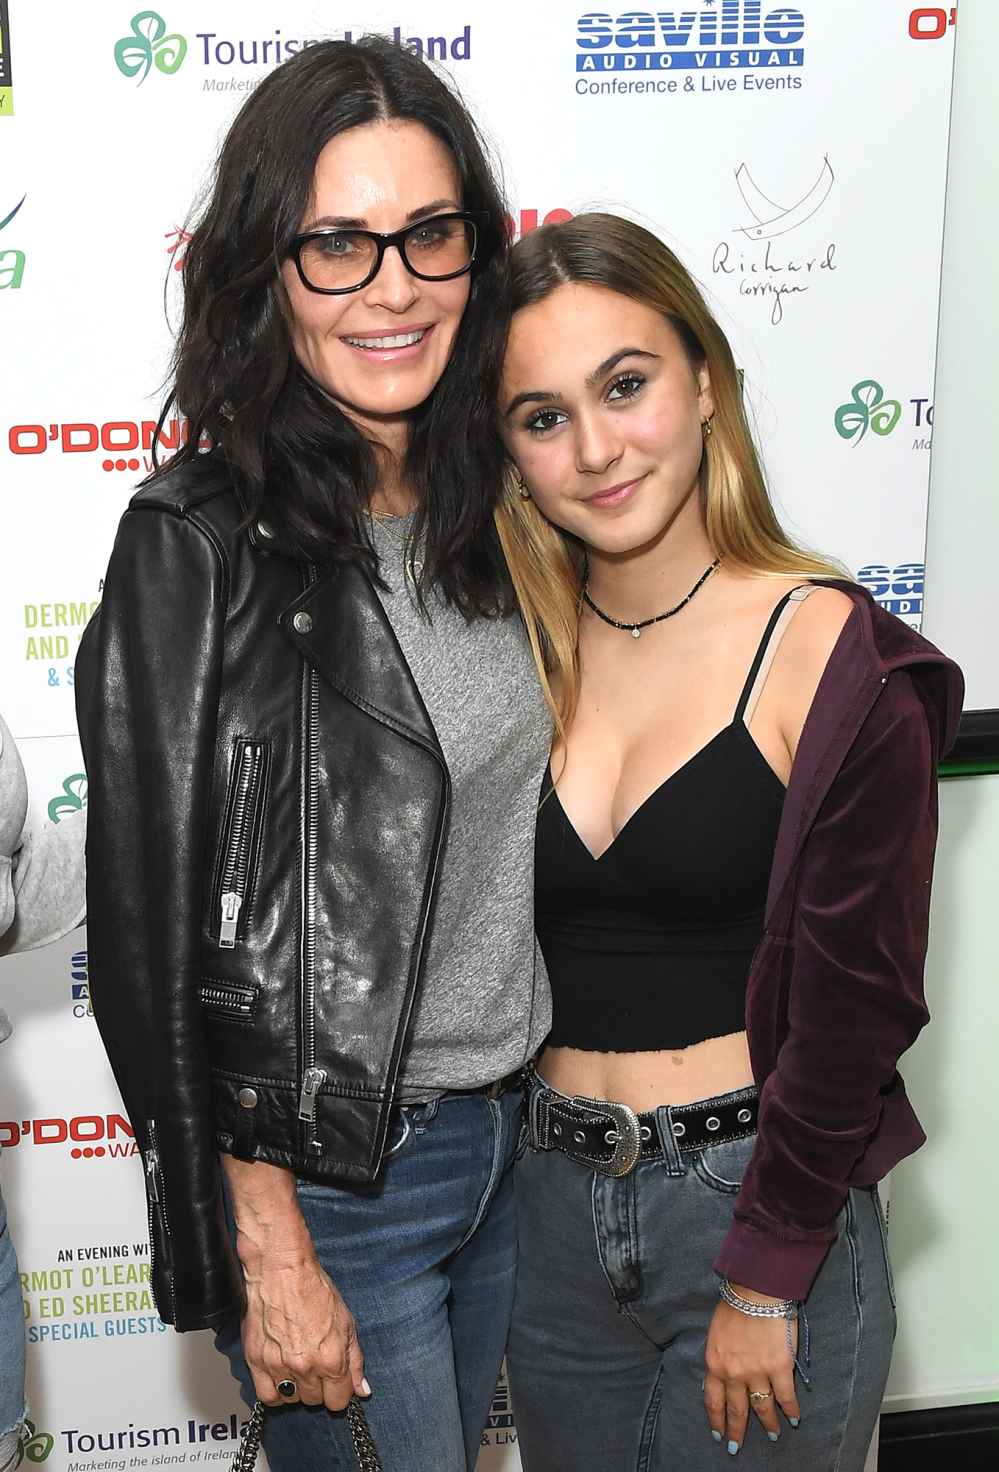 David Arquette Believes He Owes Daughter Coco an Apology for Courteney Cox Divorce